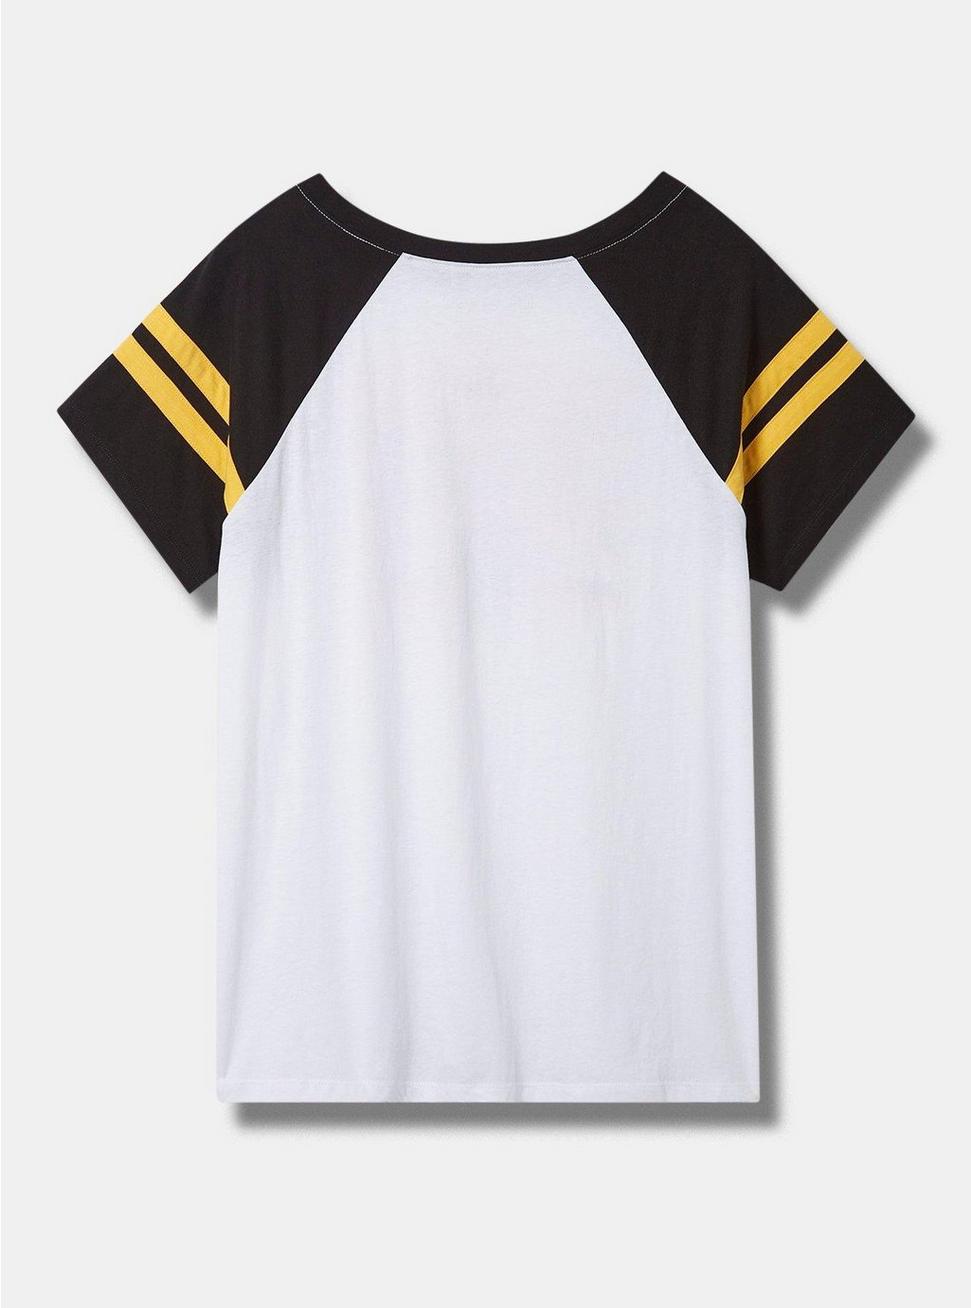 Plus Size NFL Pittsburgh Steelers Classic Fit Cotton Boatneck Varsity Tee, BRIGHT WHITE, alternate